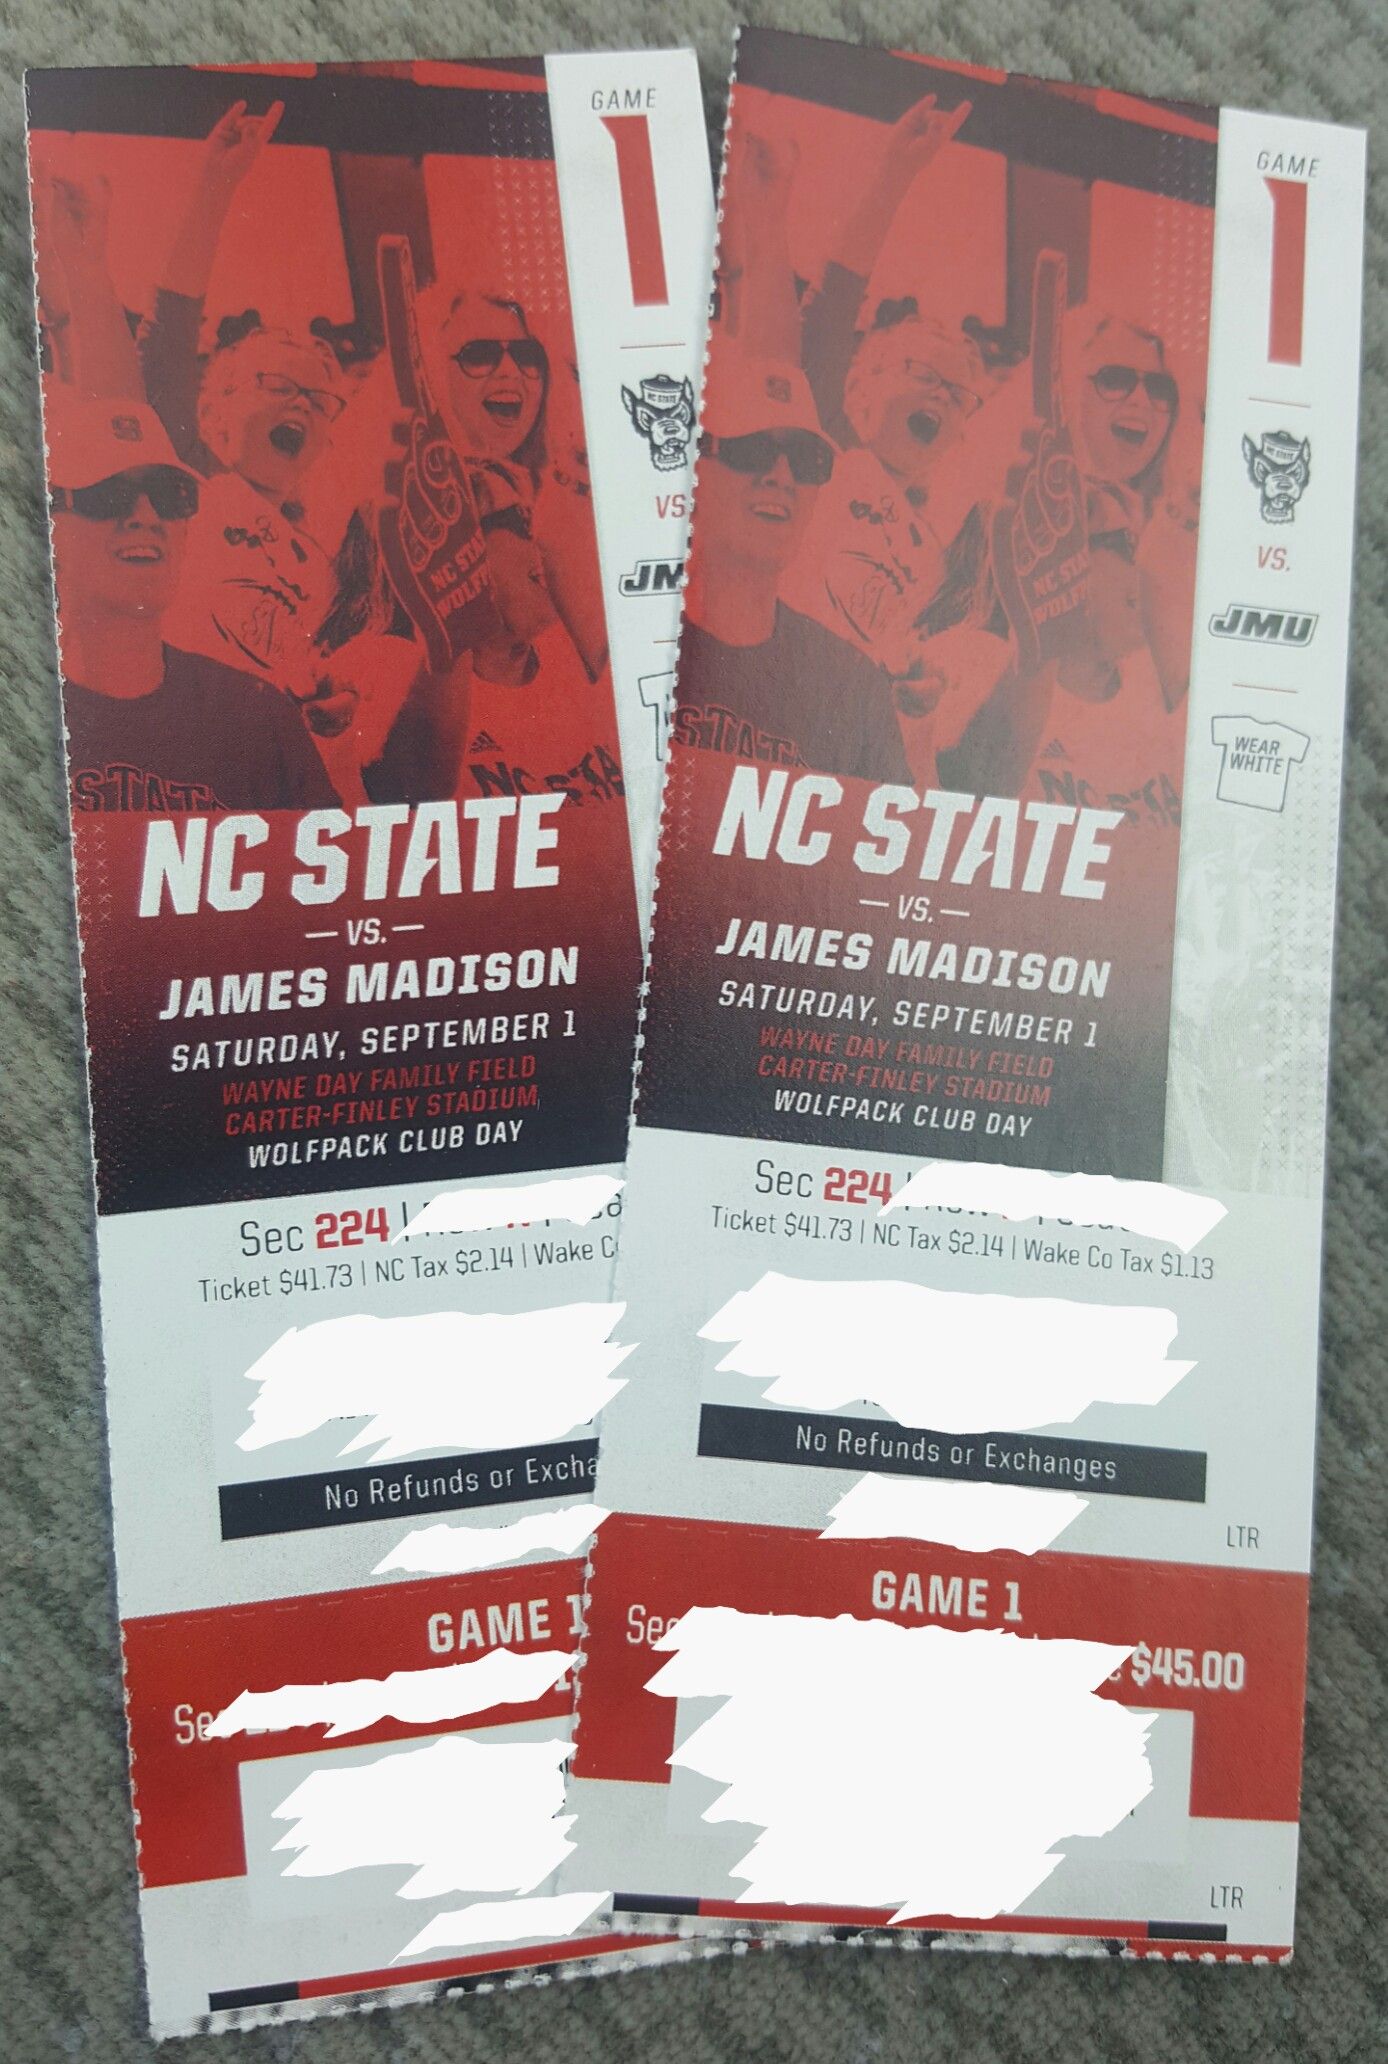 NC State vs James Madison tickets